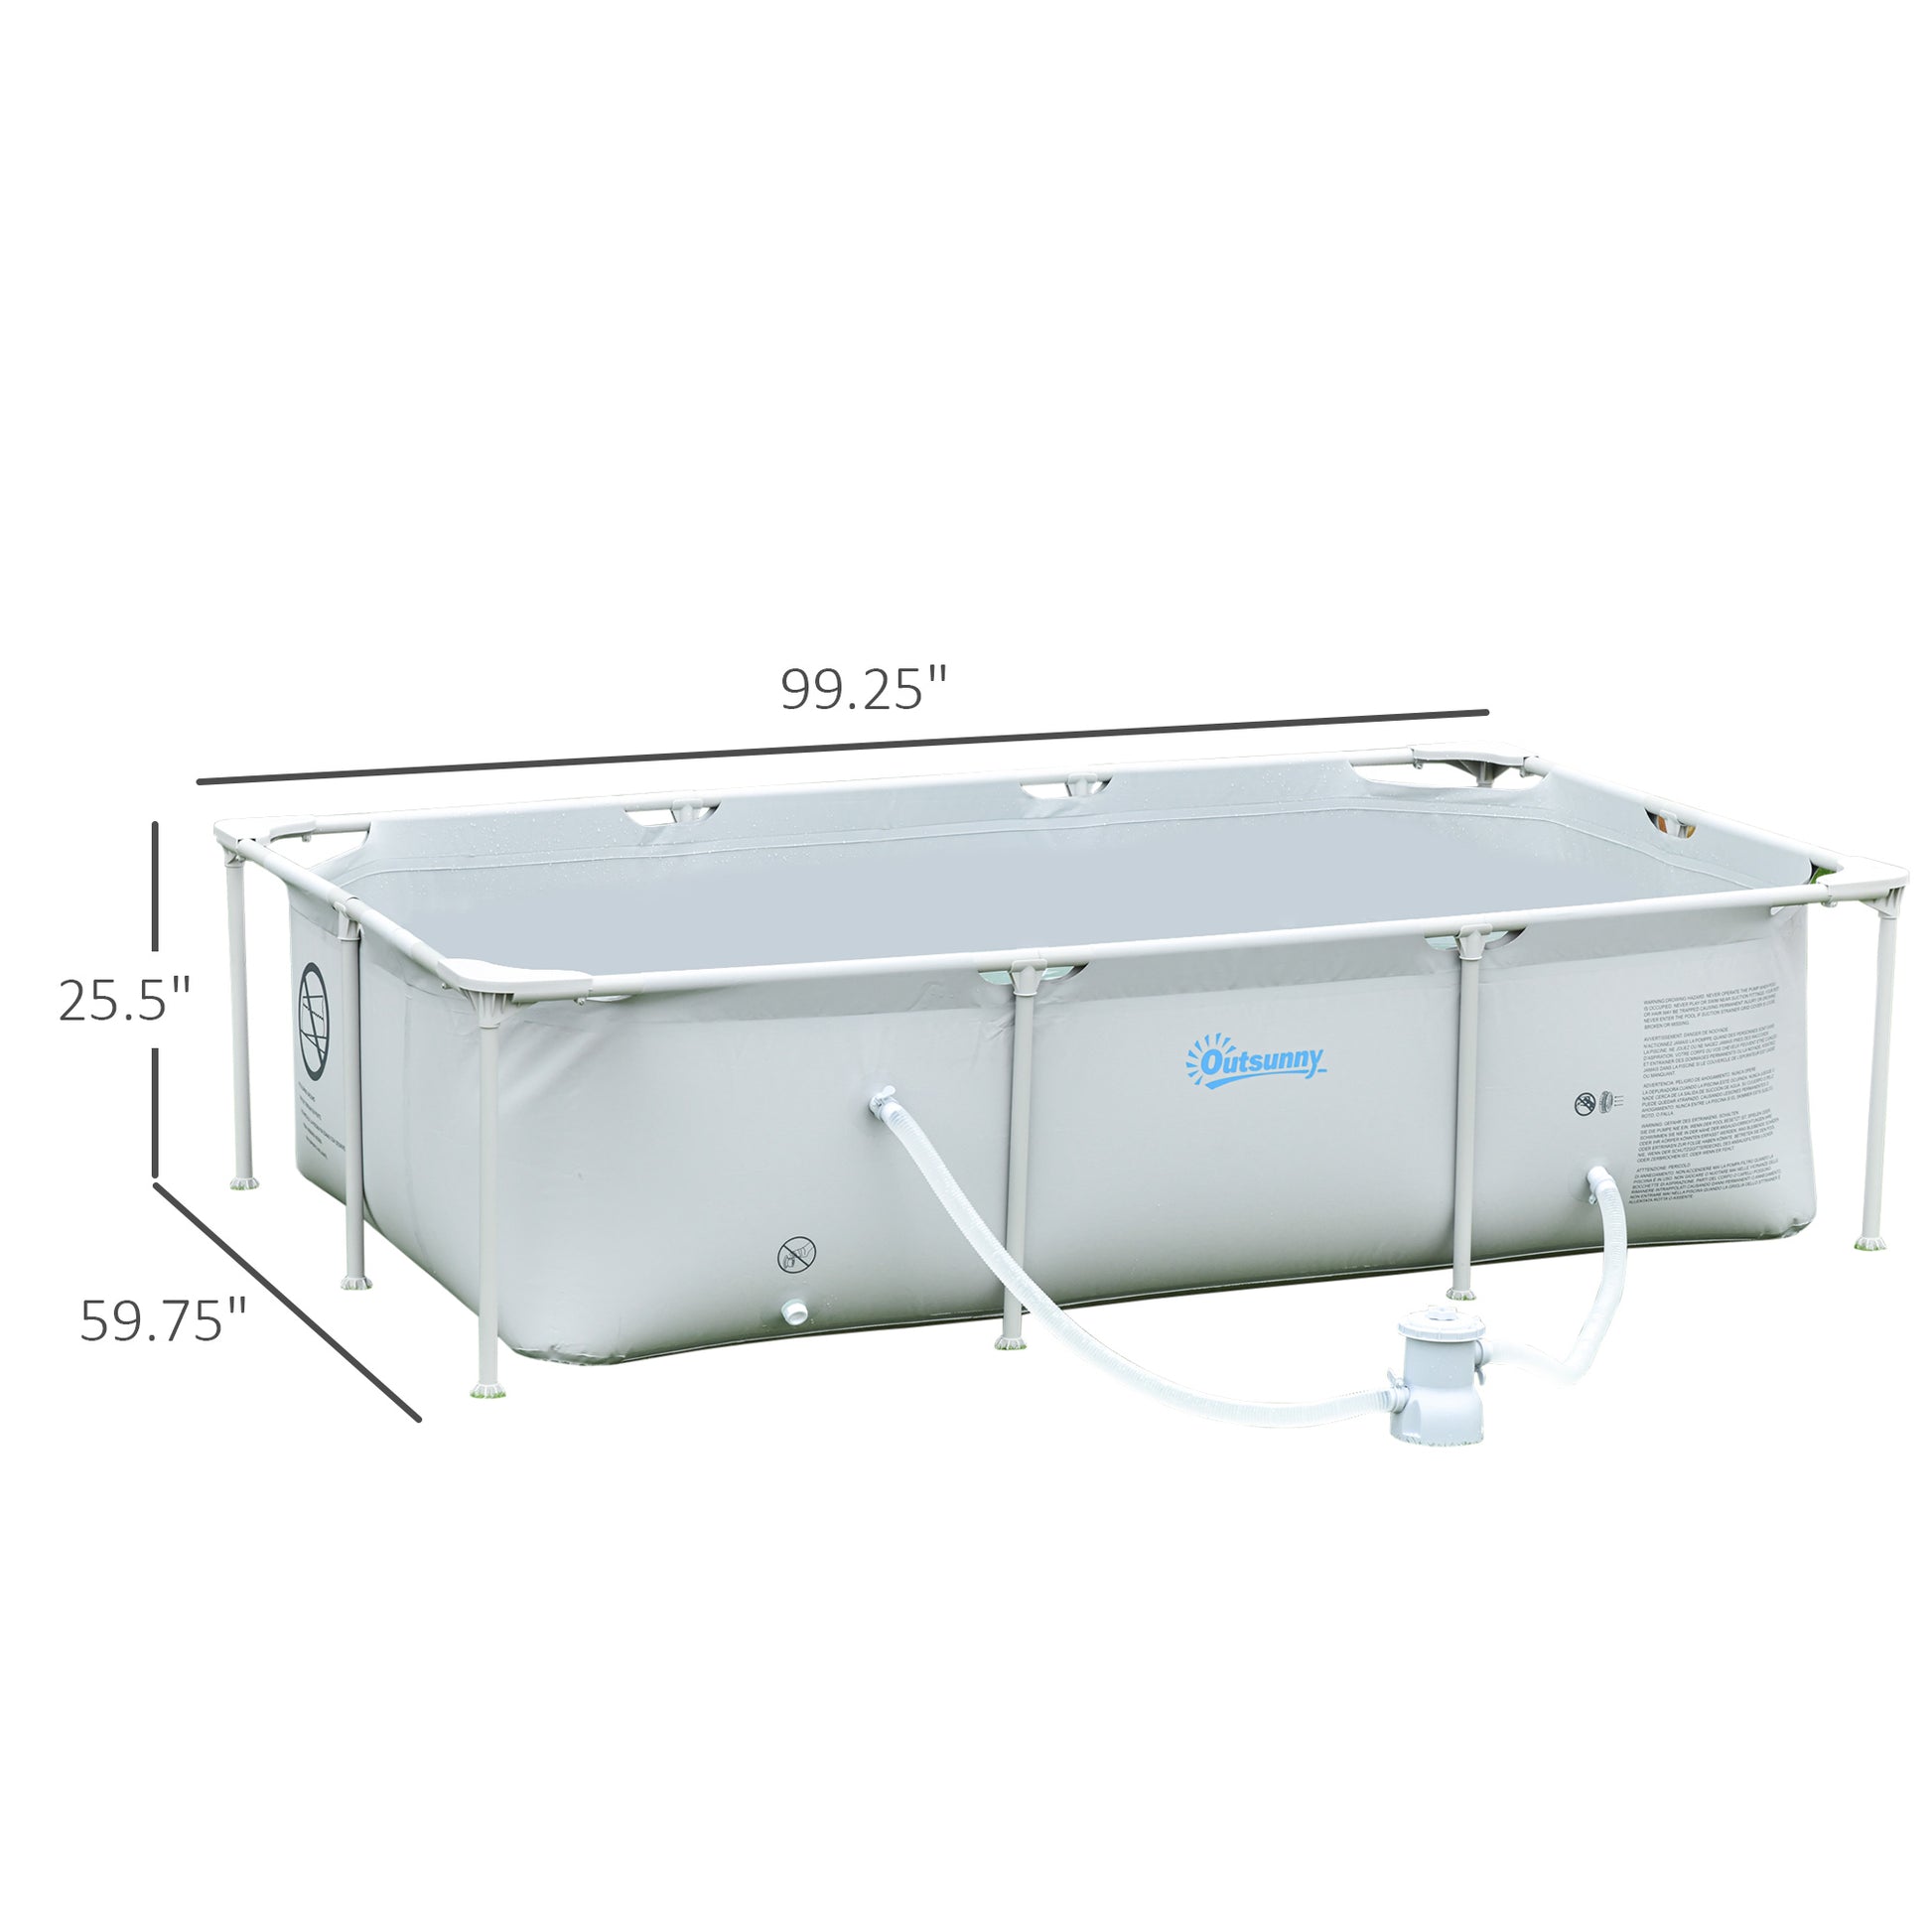 8.3ft x 5ft x 26in Frame Above Ground Swimming Pool Set with Filter Pump Filter Cartridge Reinforced Sidewalls Grey - Gallery Canada